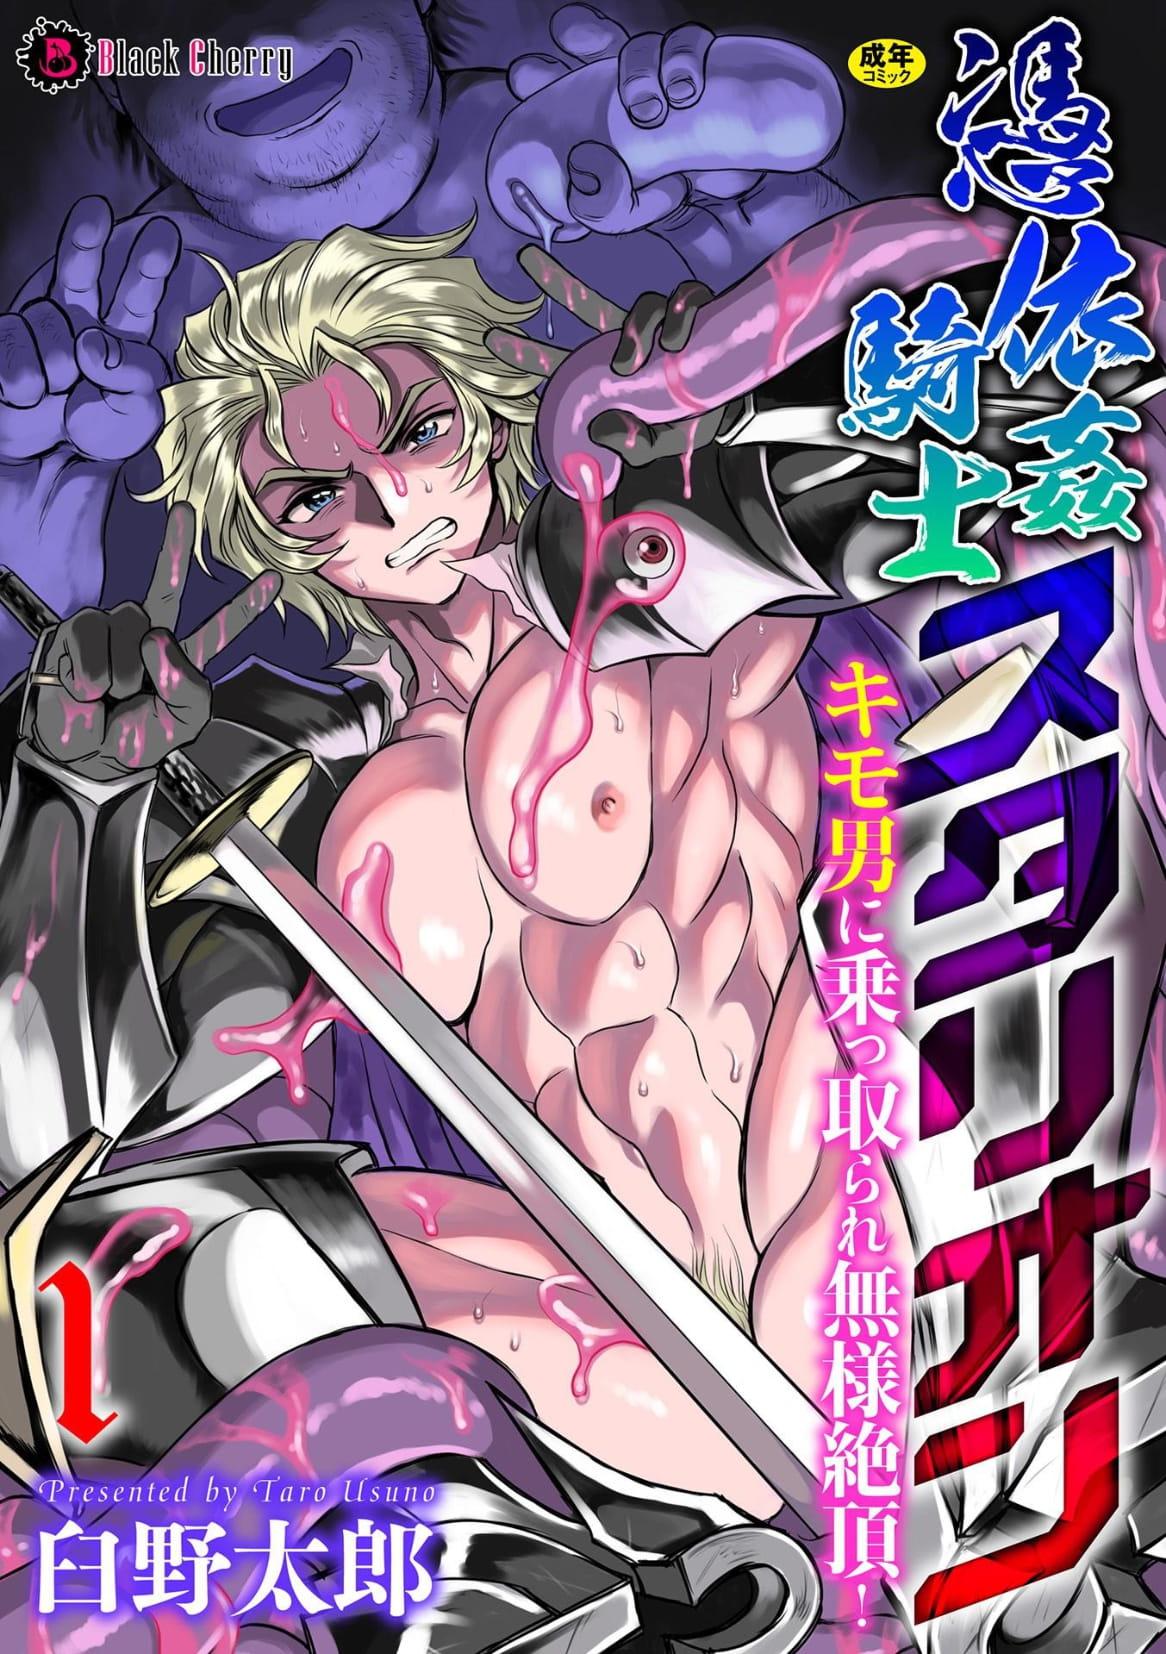 [Usuno Taro] Possessed Knight Stallion-Taken Over By Disgusting Man Raped and Climaxes Unsightly - English 0